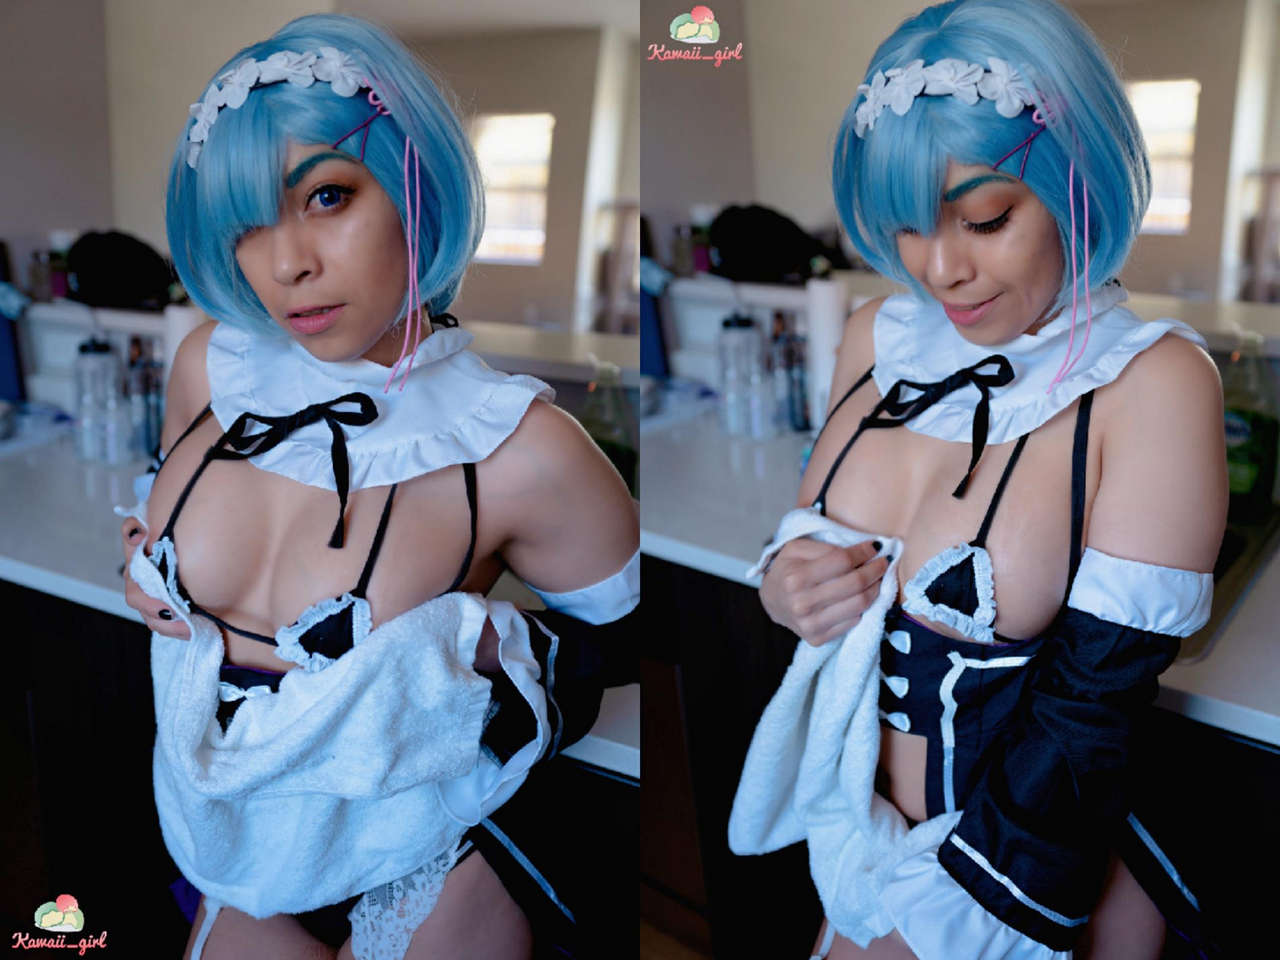 Rem From Re Zero Helping With Chores O